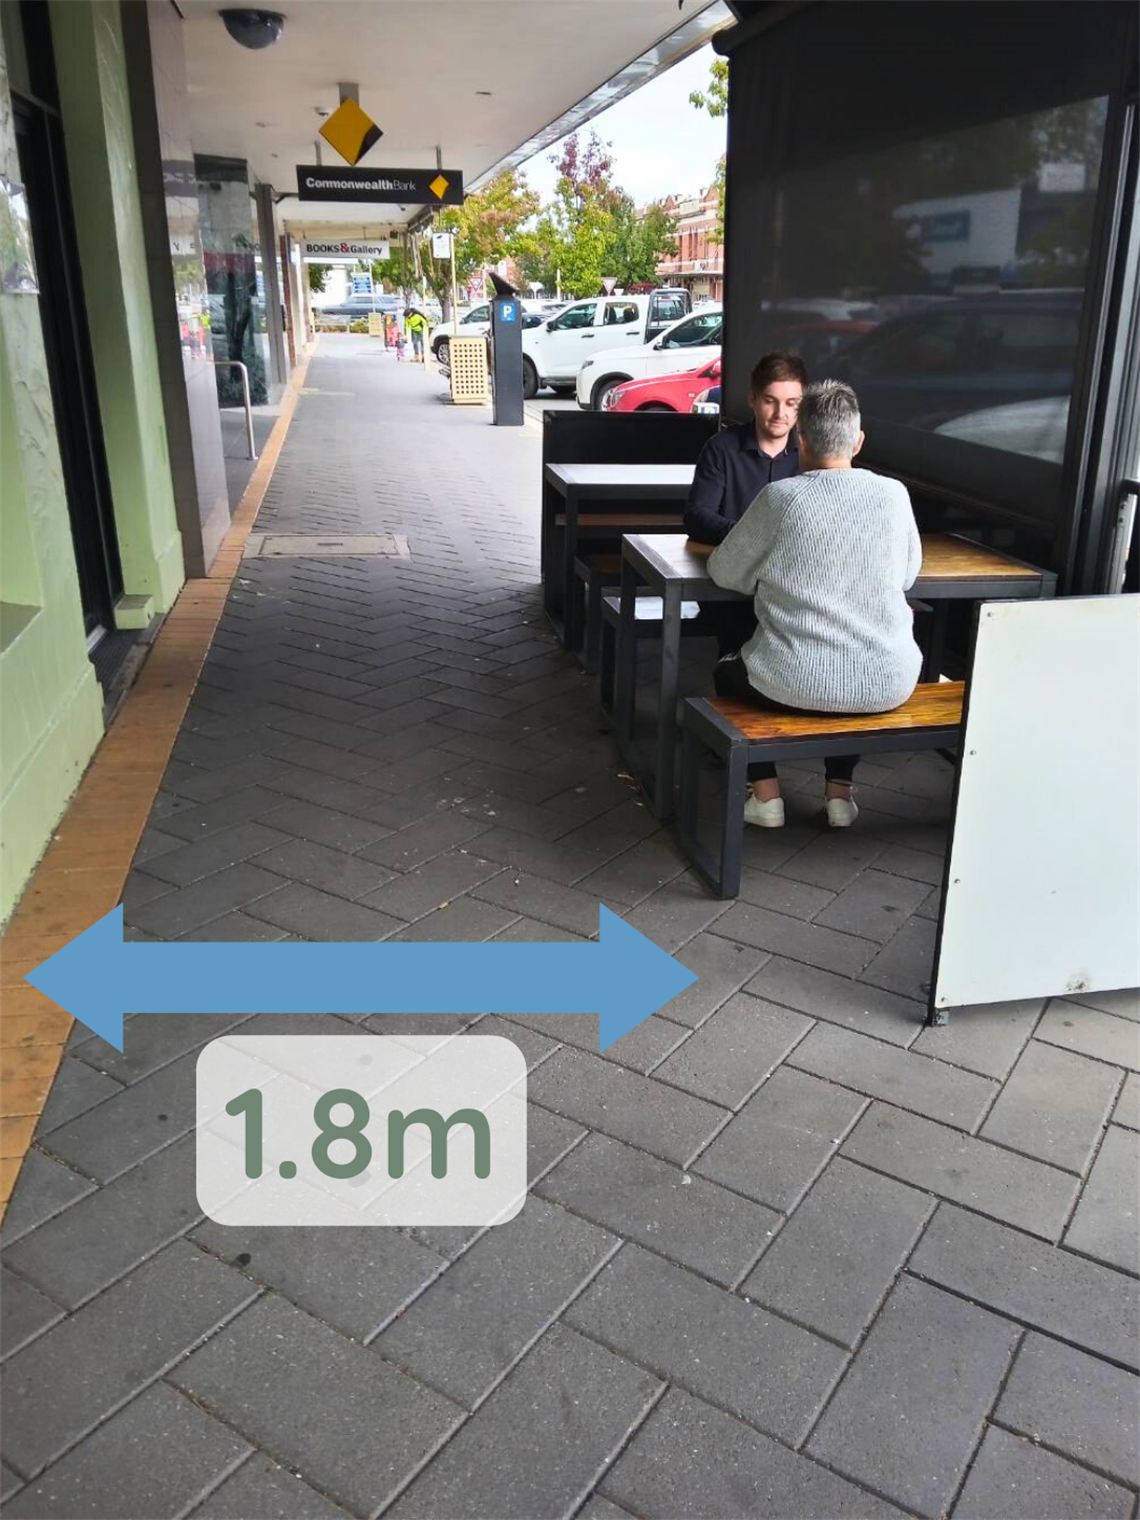 Footpath dining clearance rules